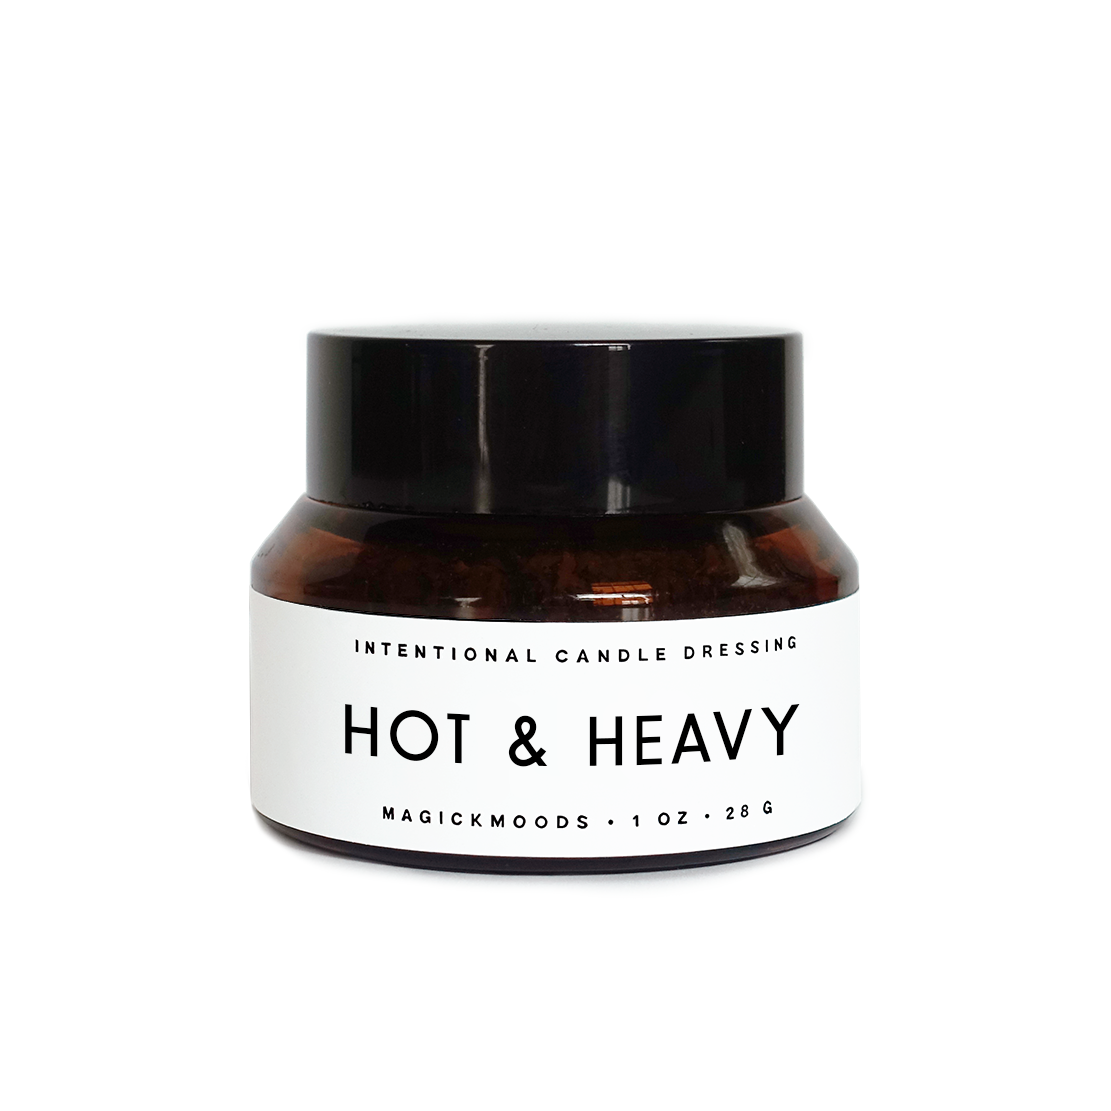 Hot & Heavy Candle Dressing